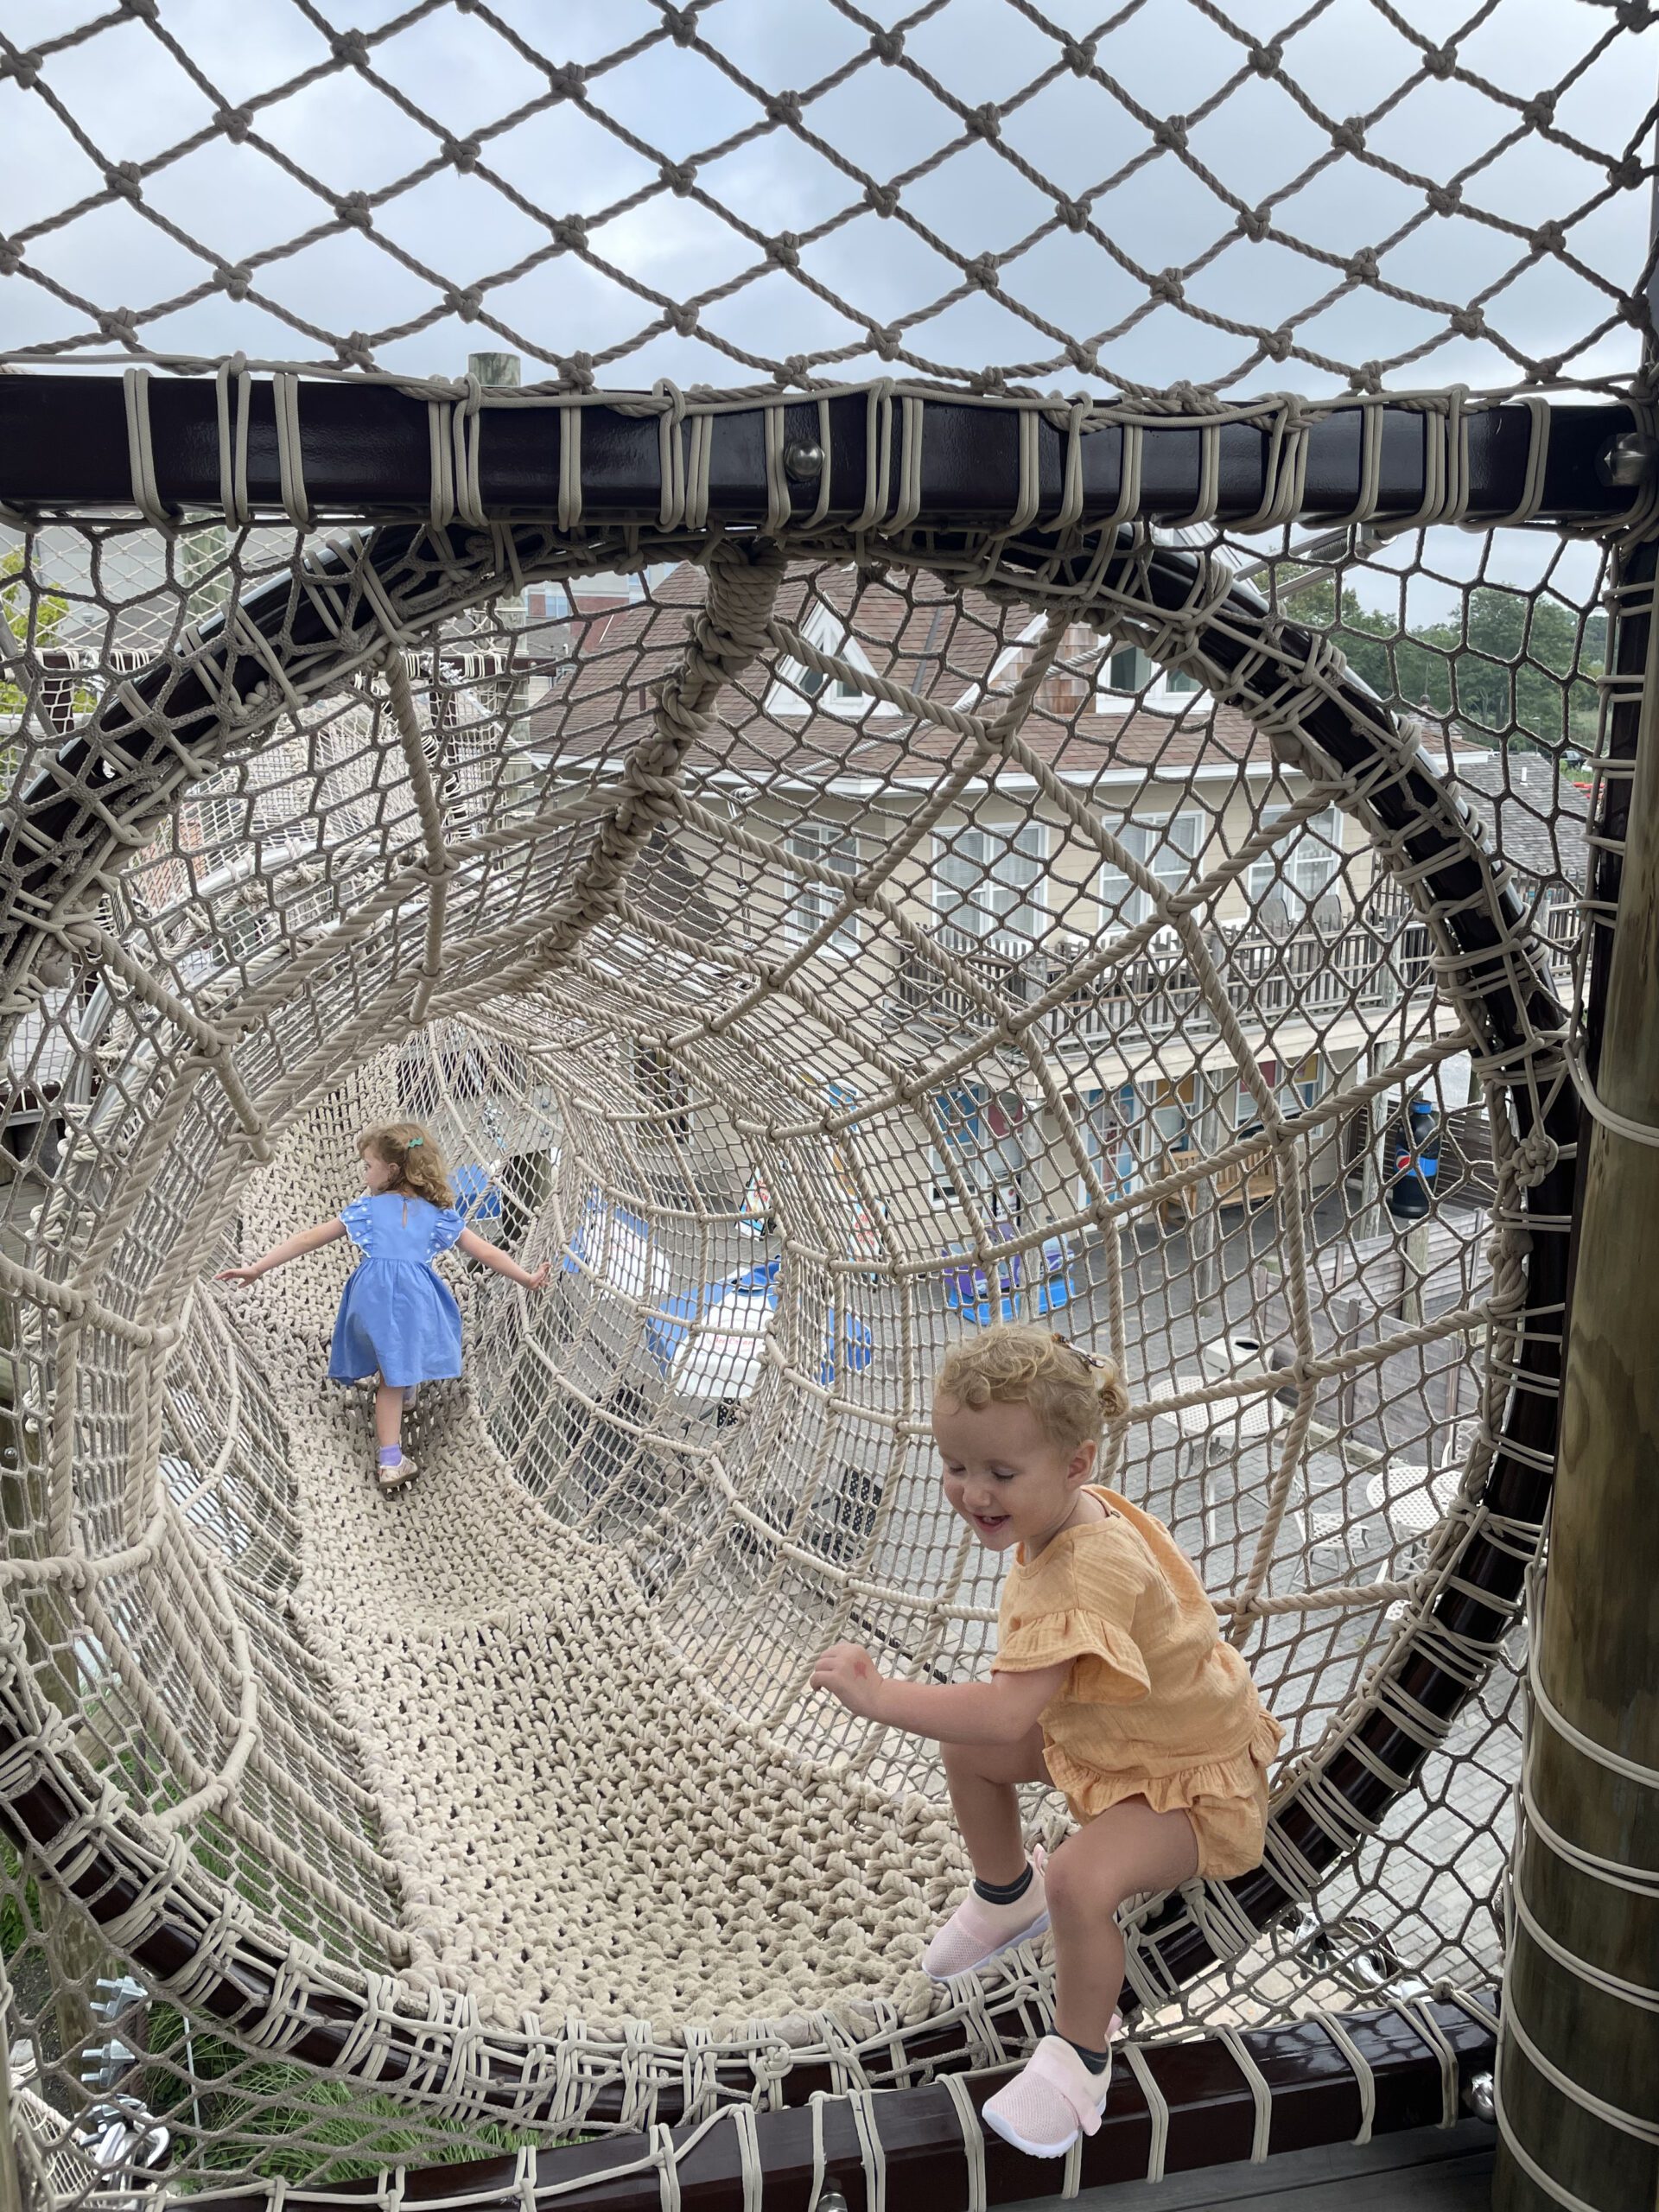 Six homes that use nets to create suspended play spaces for children